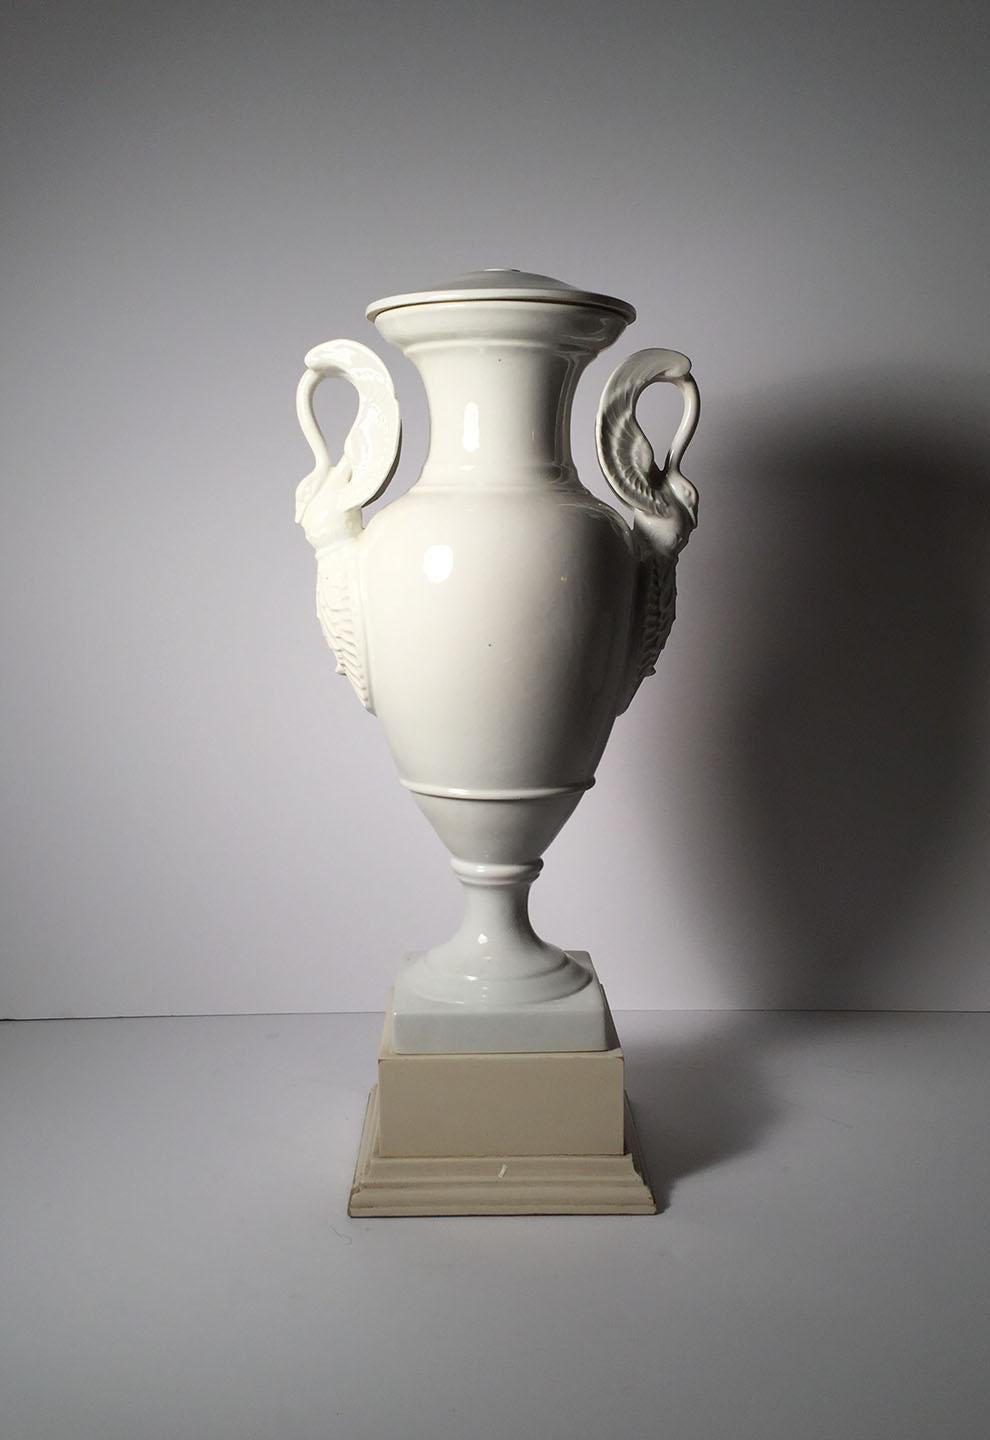 Early 20th century white porcelain Limoges lamp. Swan form handles on a neoclassical urn shaped vase.

Limoge mark on underside of each. Uncertain to when this mark was used. I believe mid-20th century.